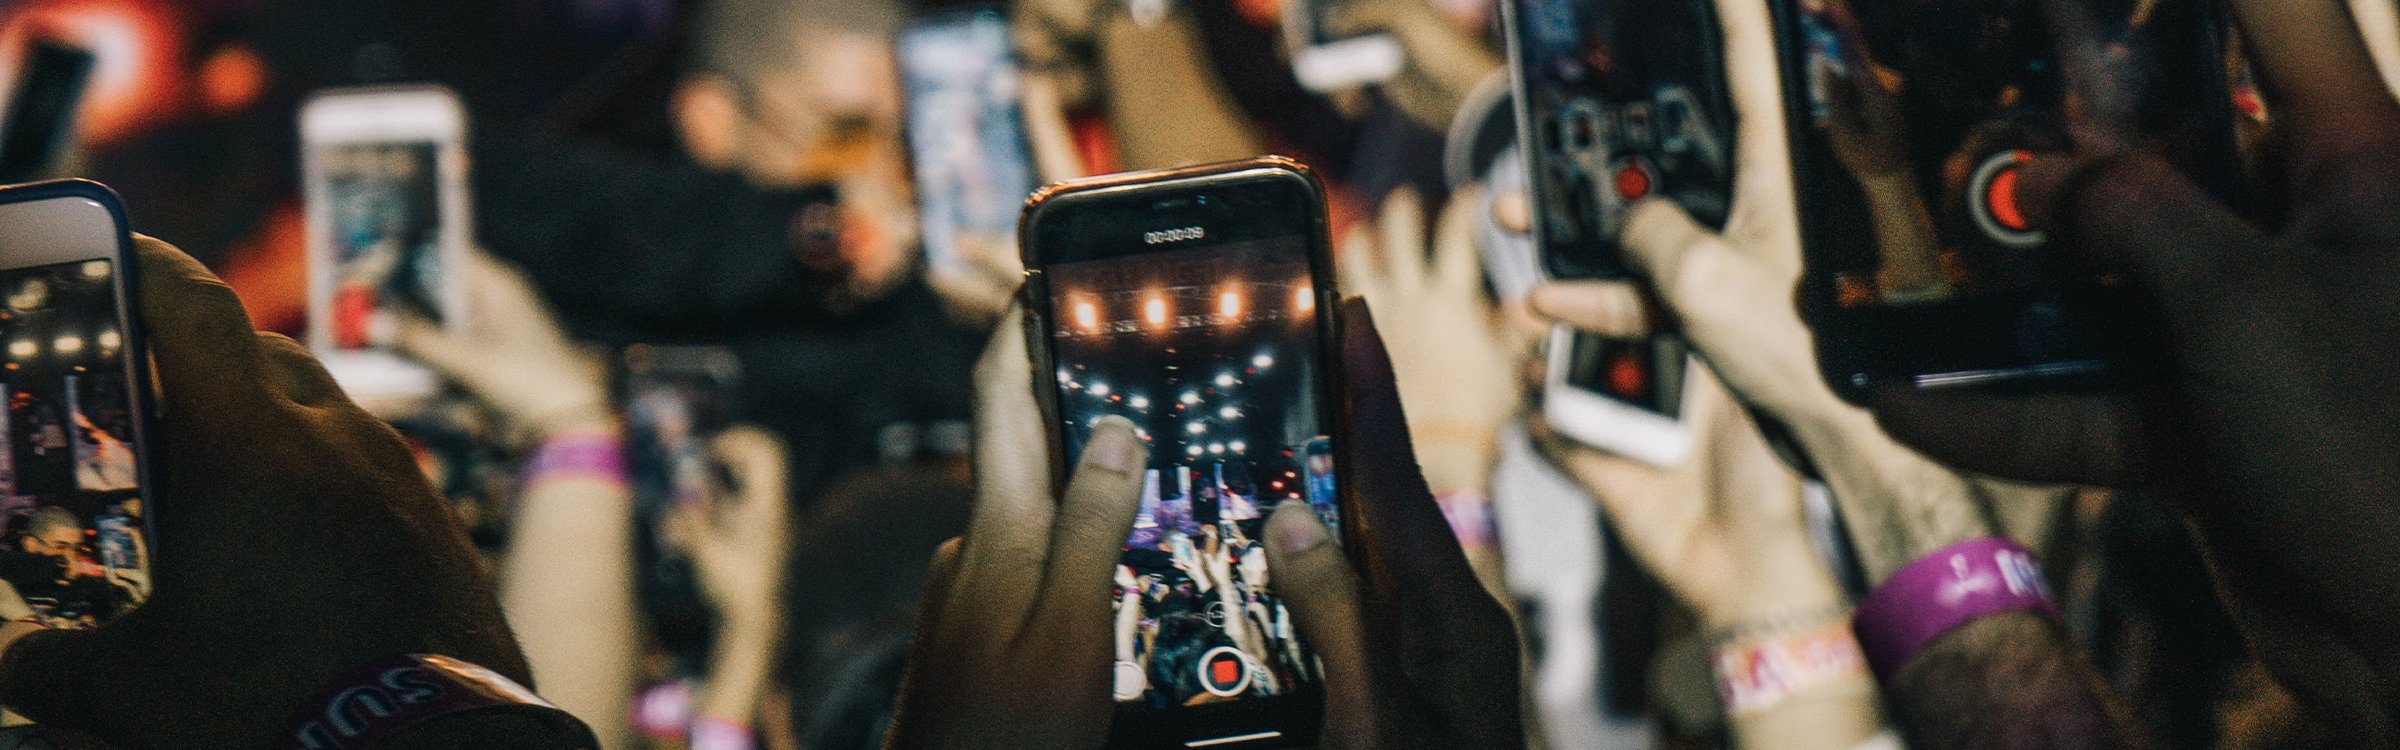 hands holding cell phones at an event